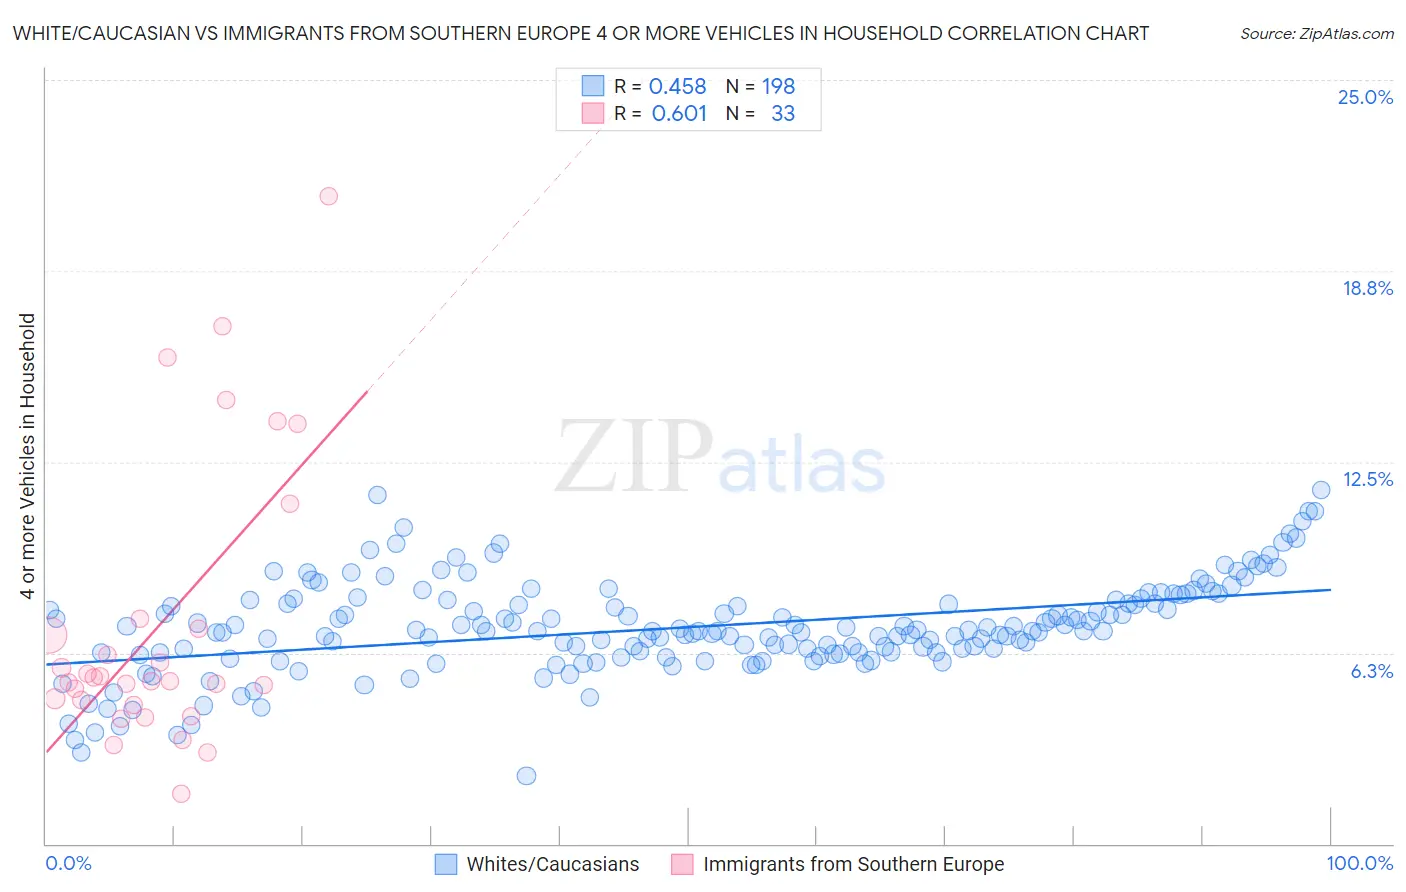 White/Caucasian vs Immigrants from Southern Europe 4 or more Vehicles in Household